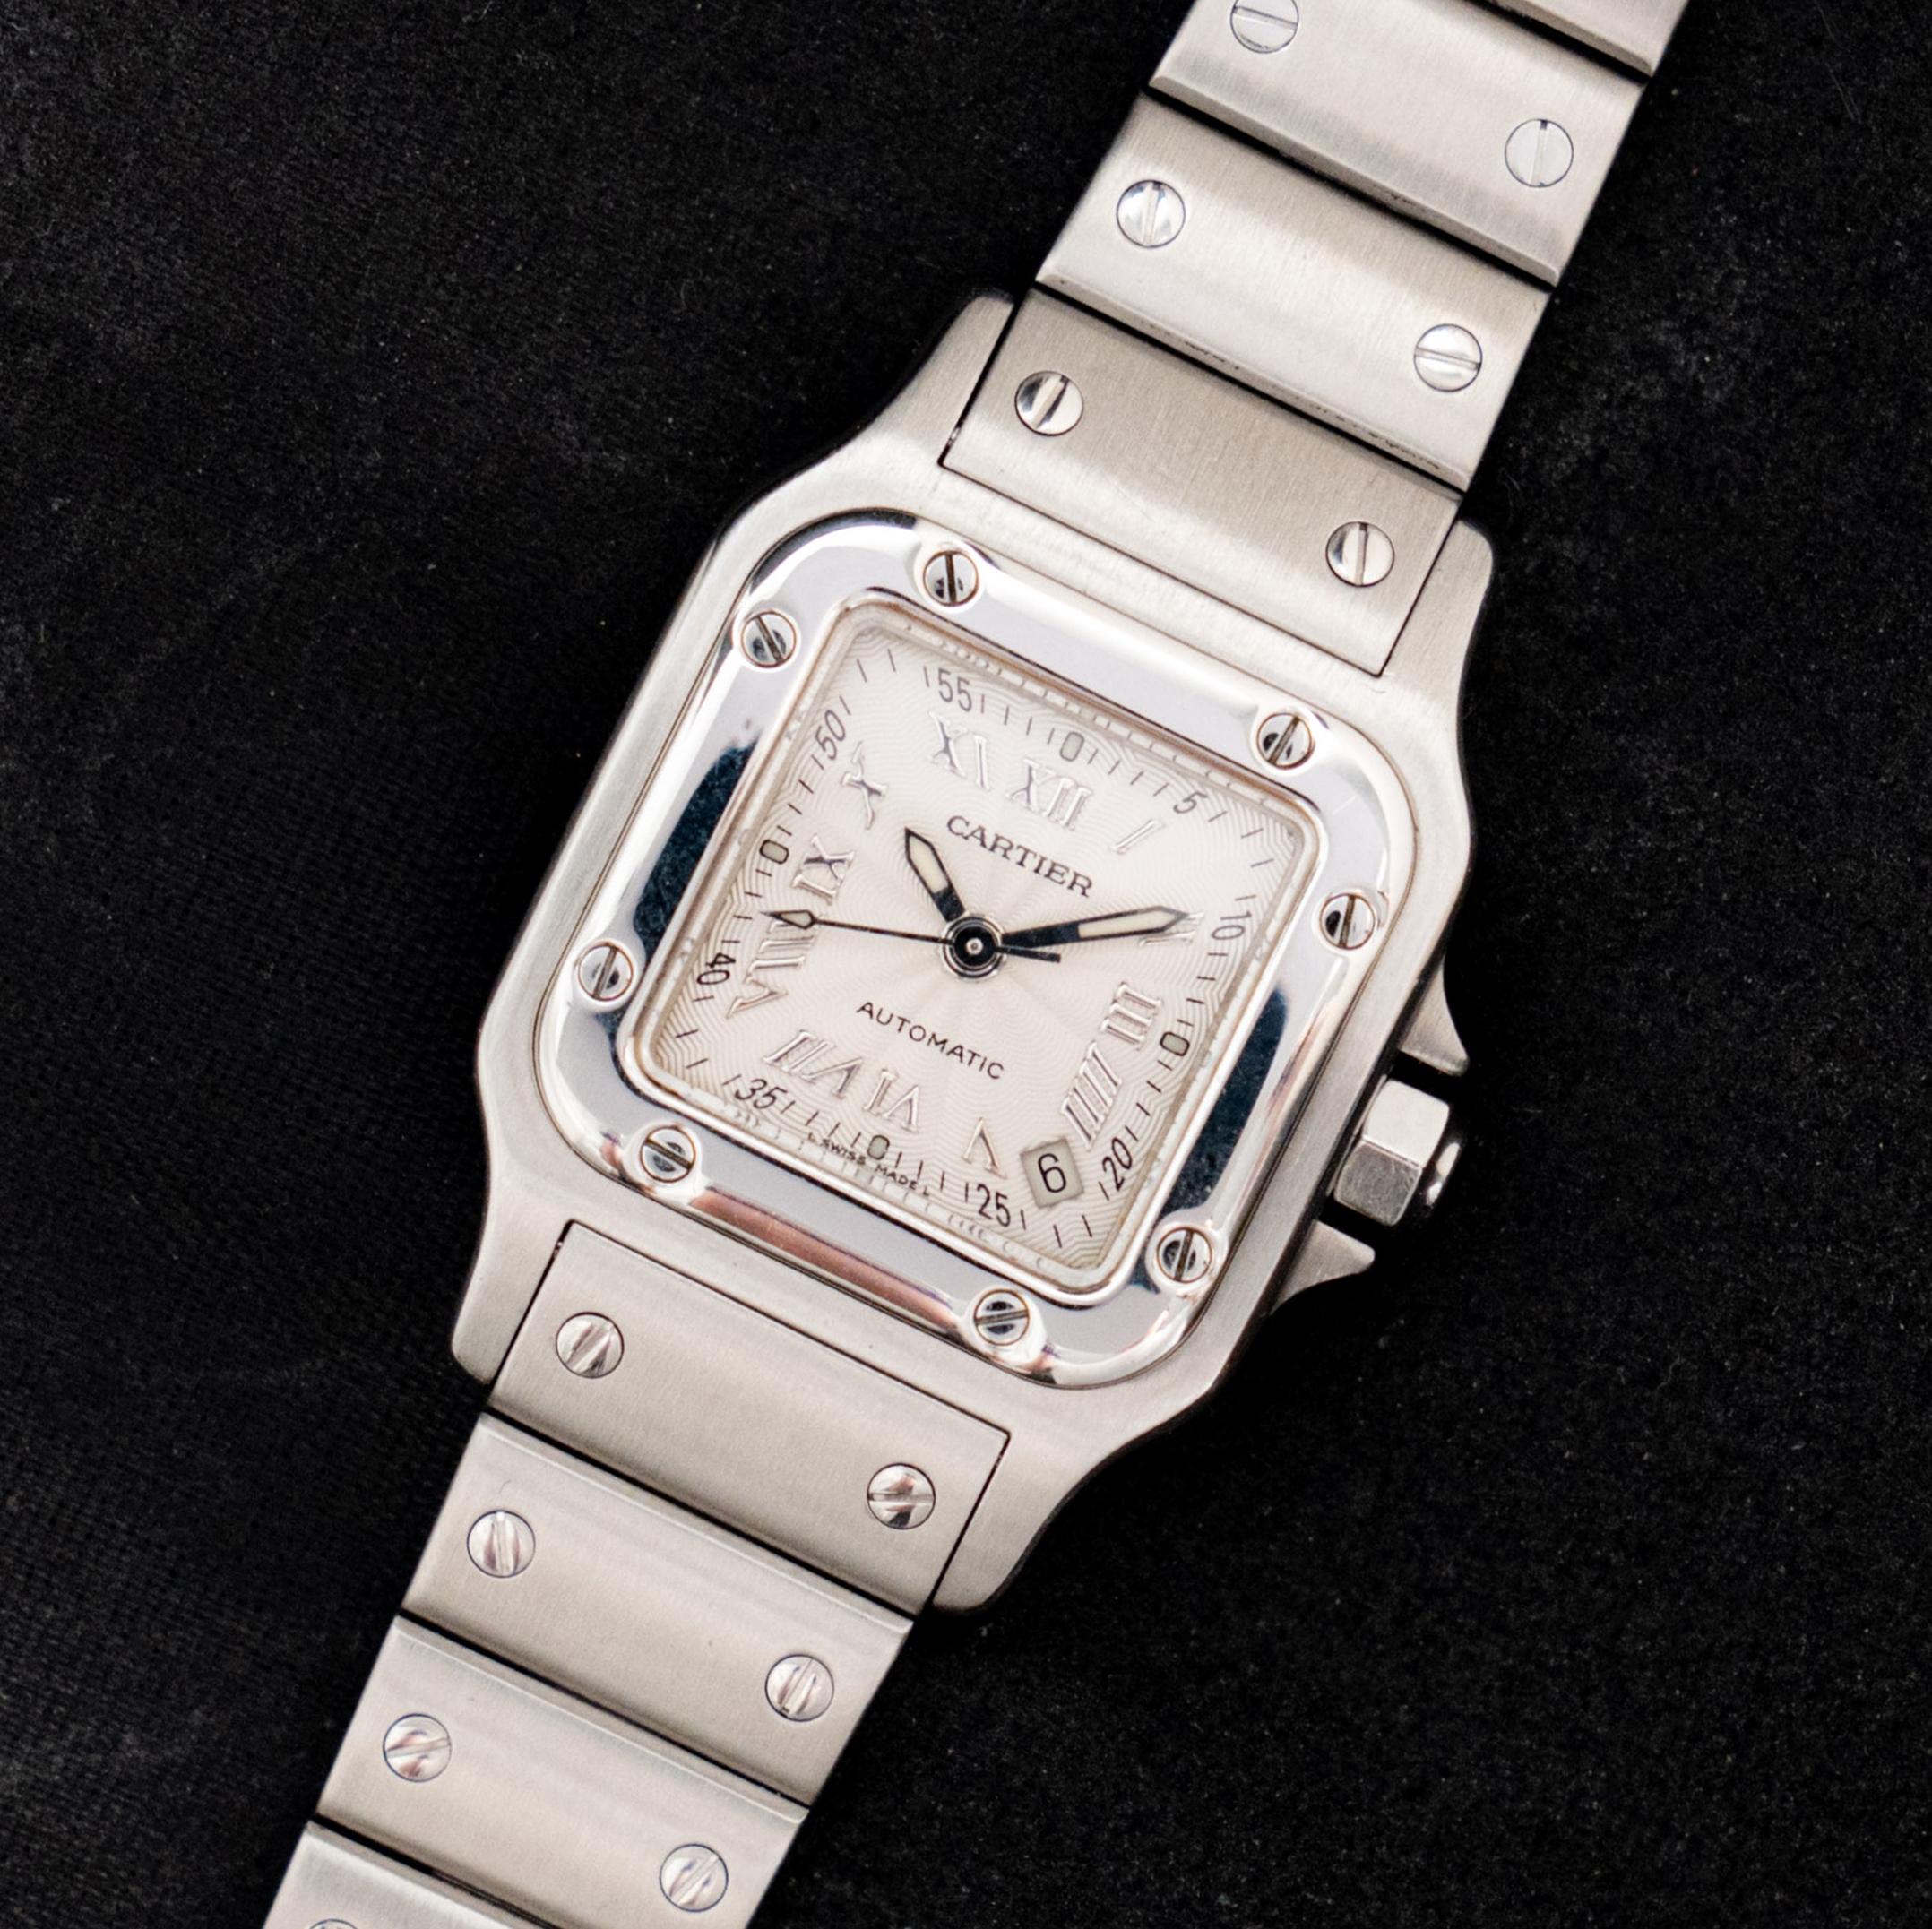 Brand: Cartier
Model: Santos Galbée 2423
Year: 2000’s
Serial Number: 780xxxxxx
Reference: C03913

Case: Show sign of wear with the Stainless Steel Case in size 24 x 35mm without crown; Cartier serial numbers engraved on the case back

Dial: